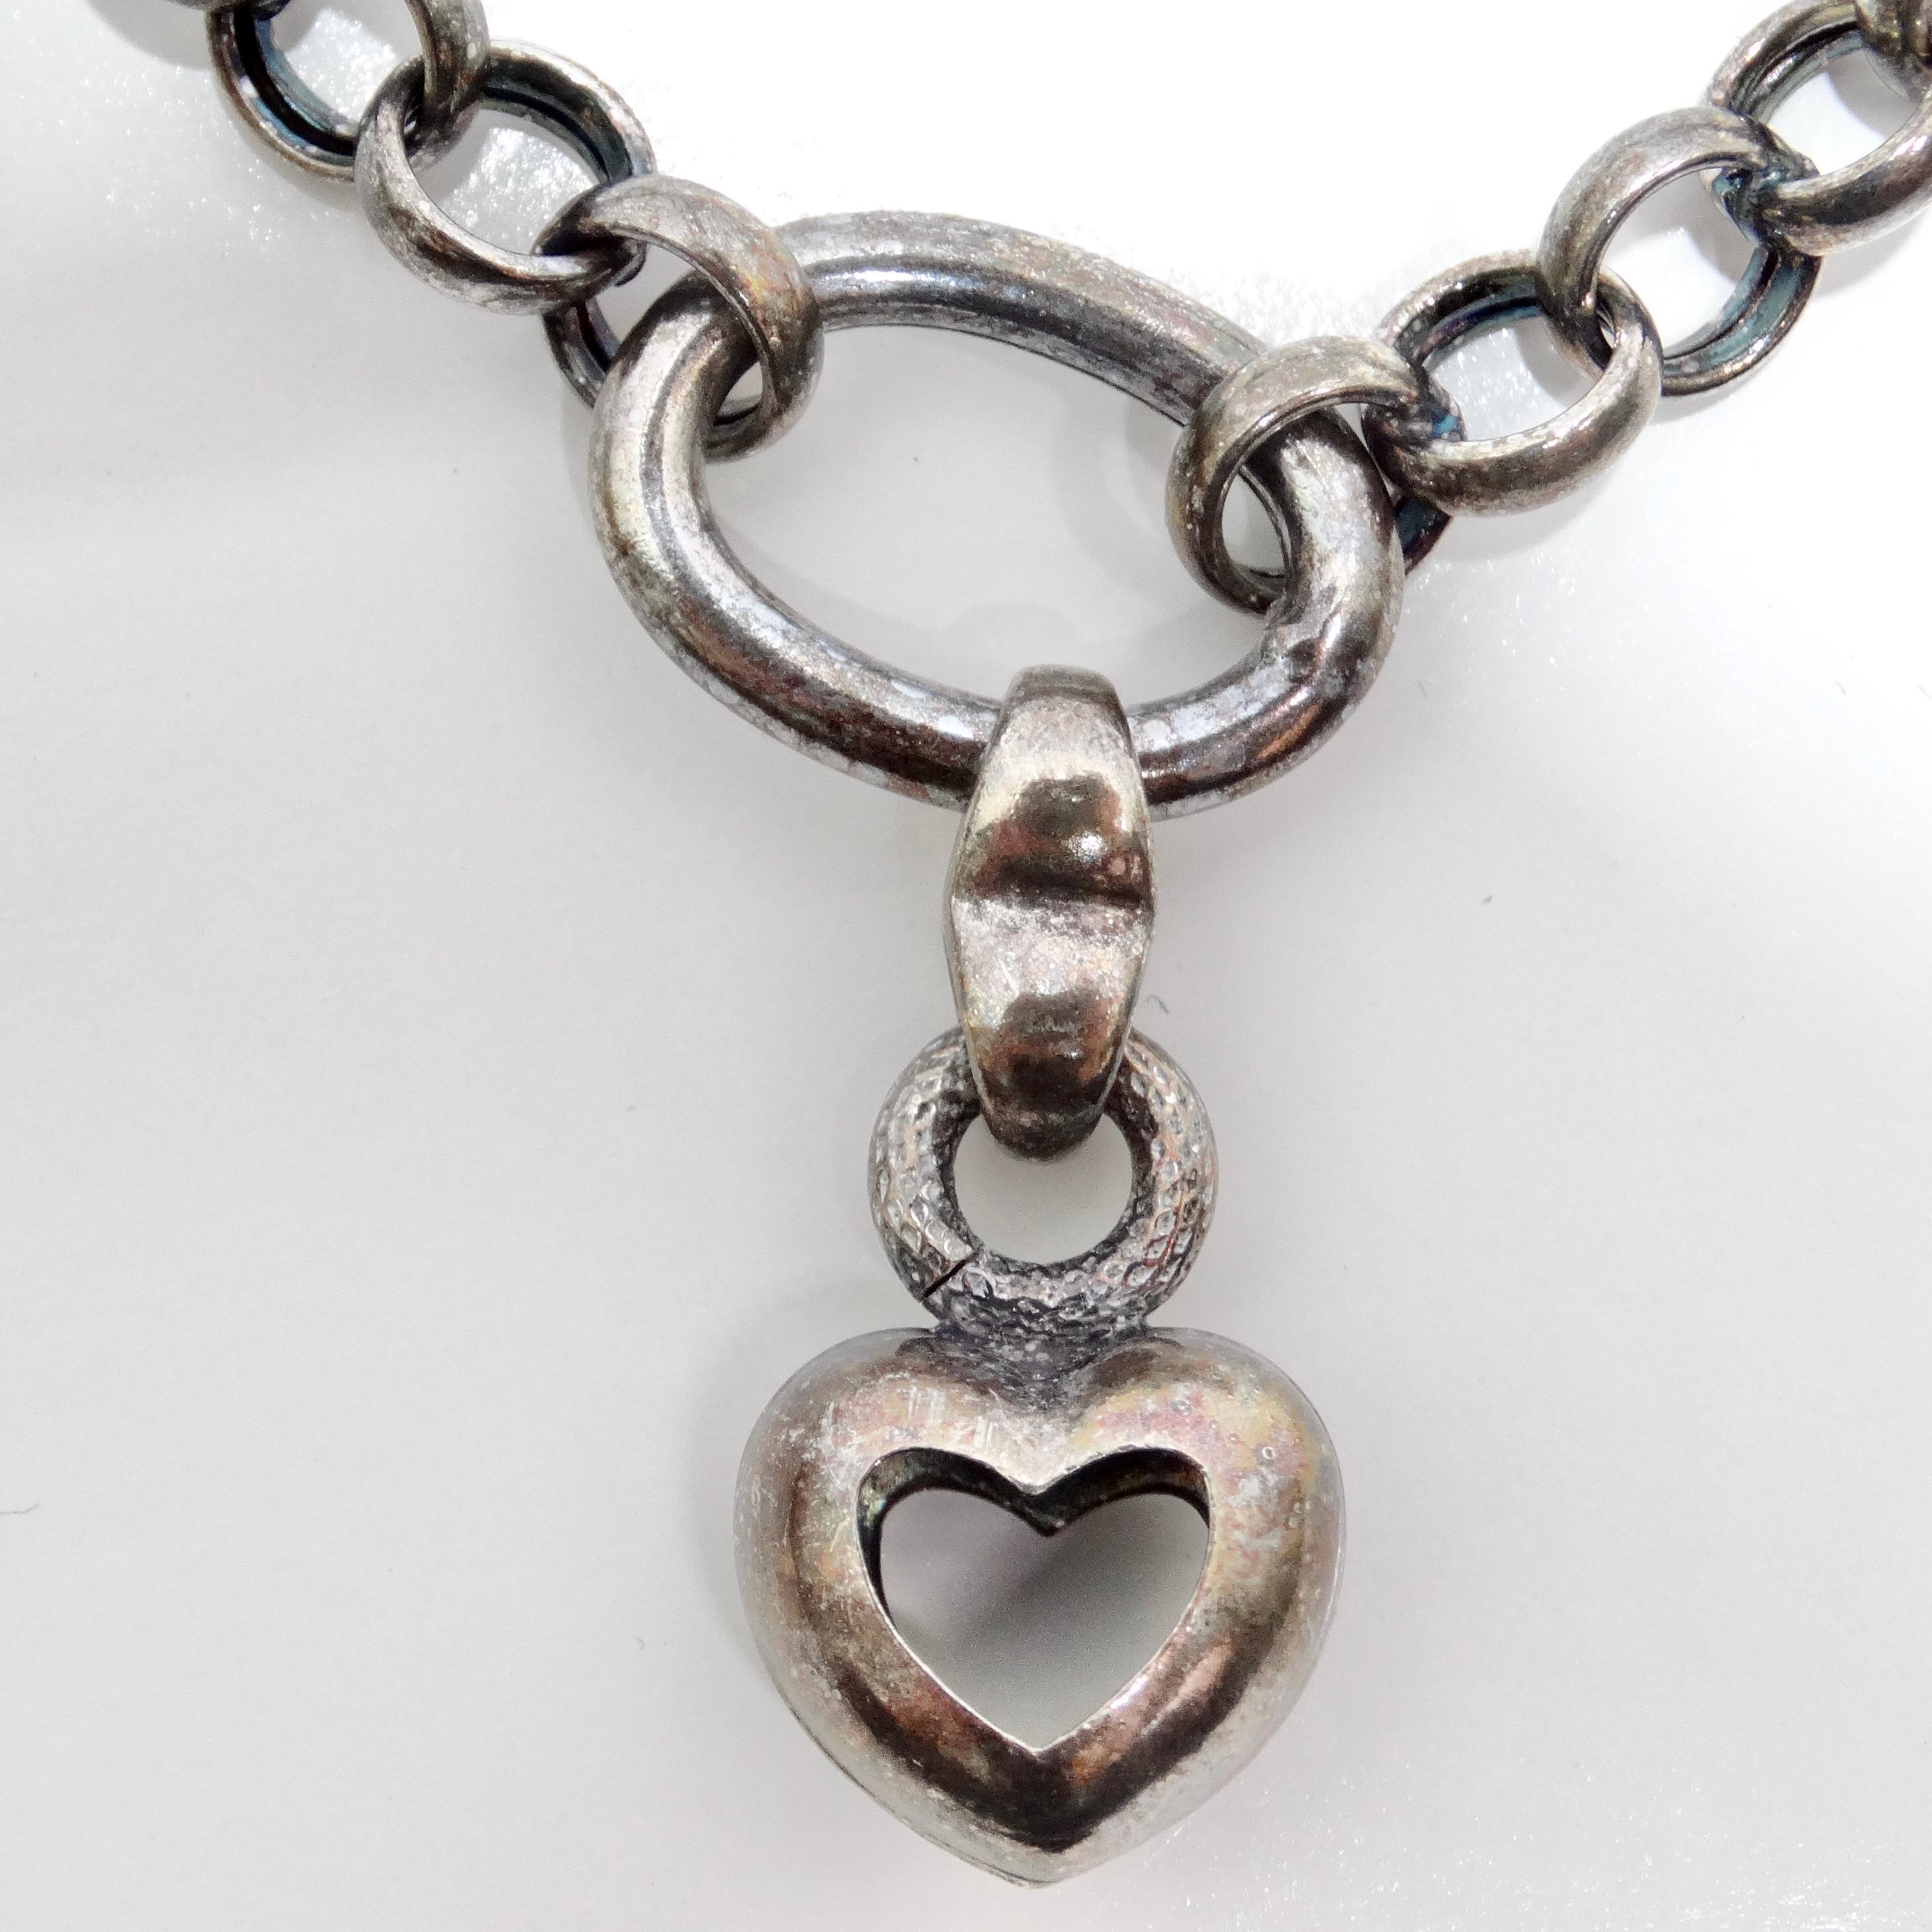 Introducing the 1970s Solid Silver Heart Charm Bracelet, a charming vintage piece that brings a touch of sweetness and elegance to any jewelry collection. This beautiful bracelet features a pure silver chain with an adorable dangling heart charm,